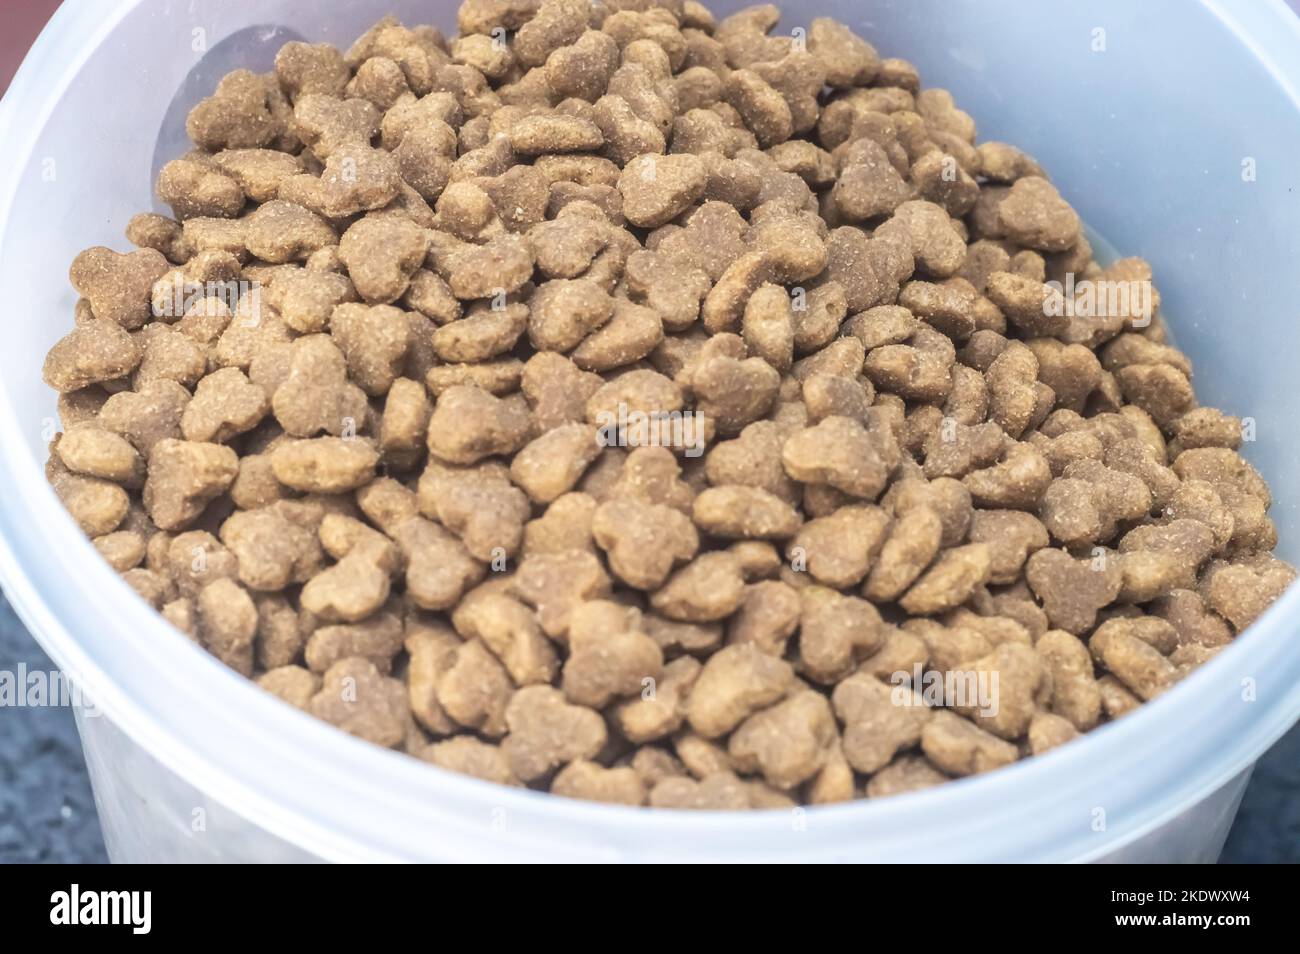 Dry pet food background. Pile of granulated animal feeds. Granules of good nutrition for dogs and cats.. Stock Photo